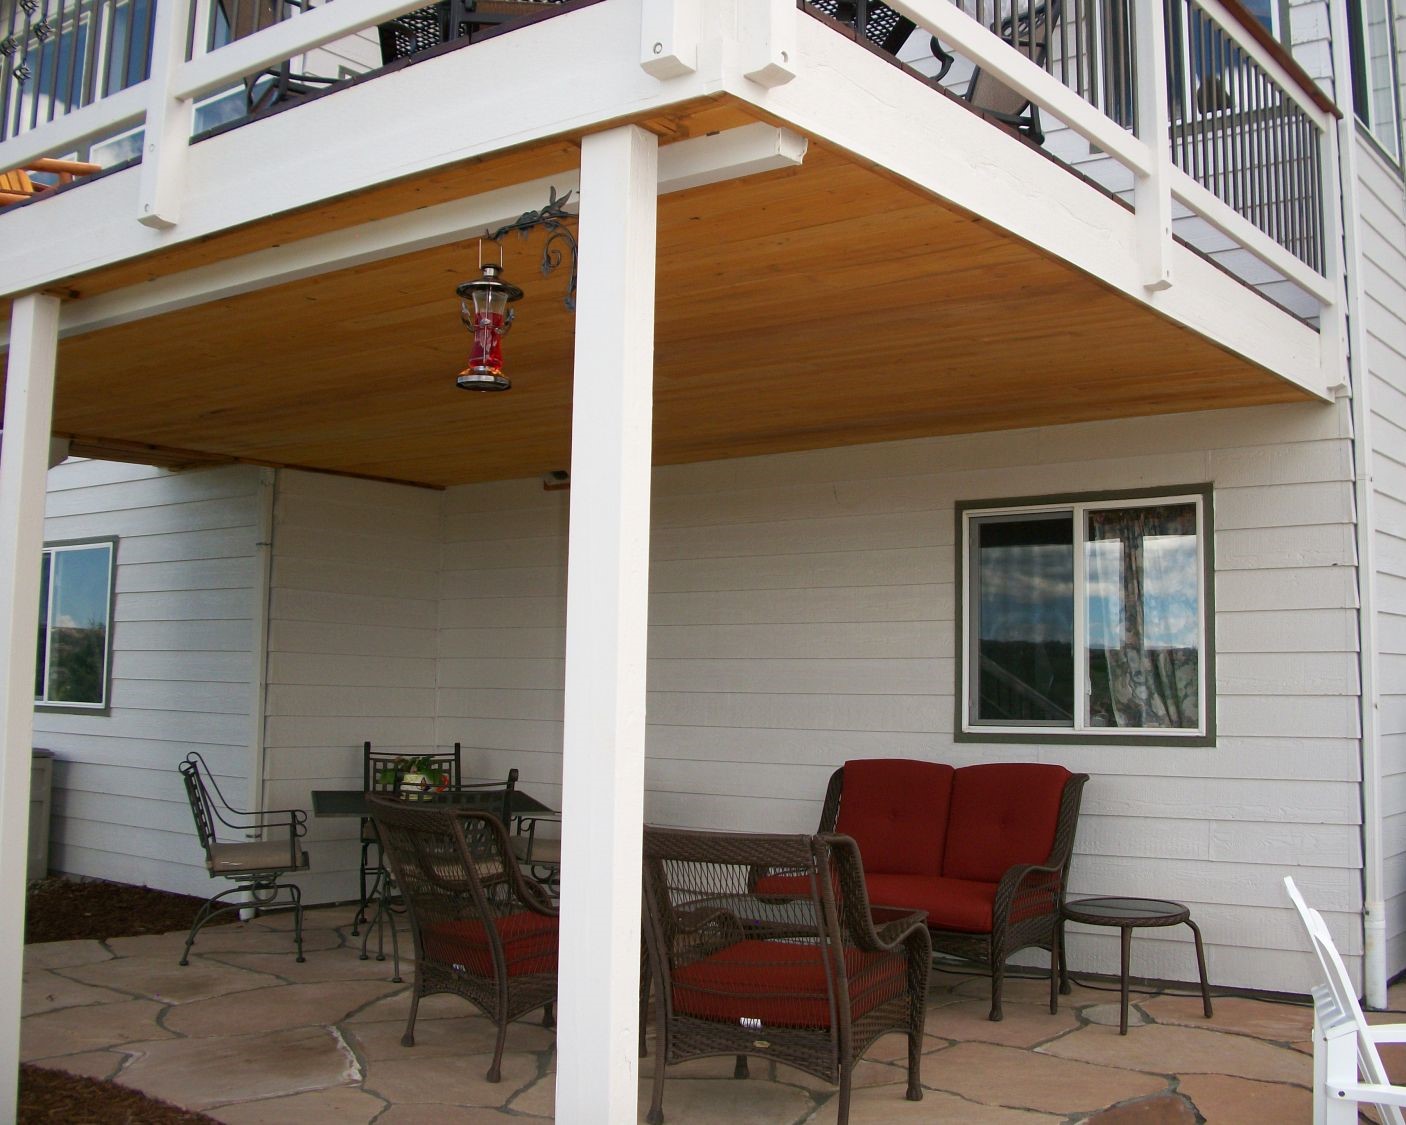 Elevated deck with an under-deck drainage system featuring a tongue and groove ceiling. This allows an area for entertaining below the deck that will be kept dry.